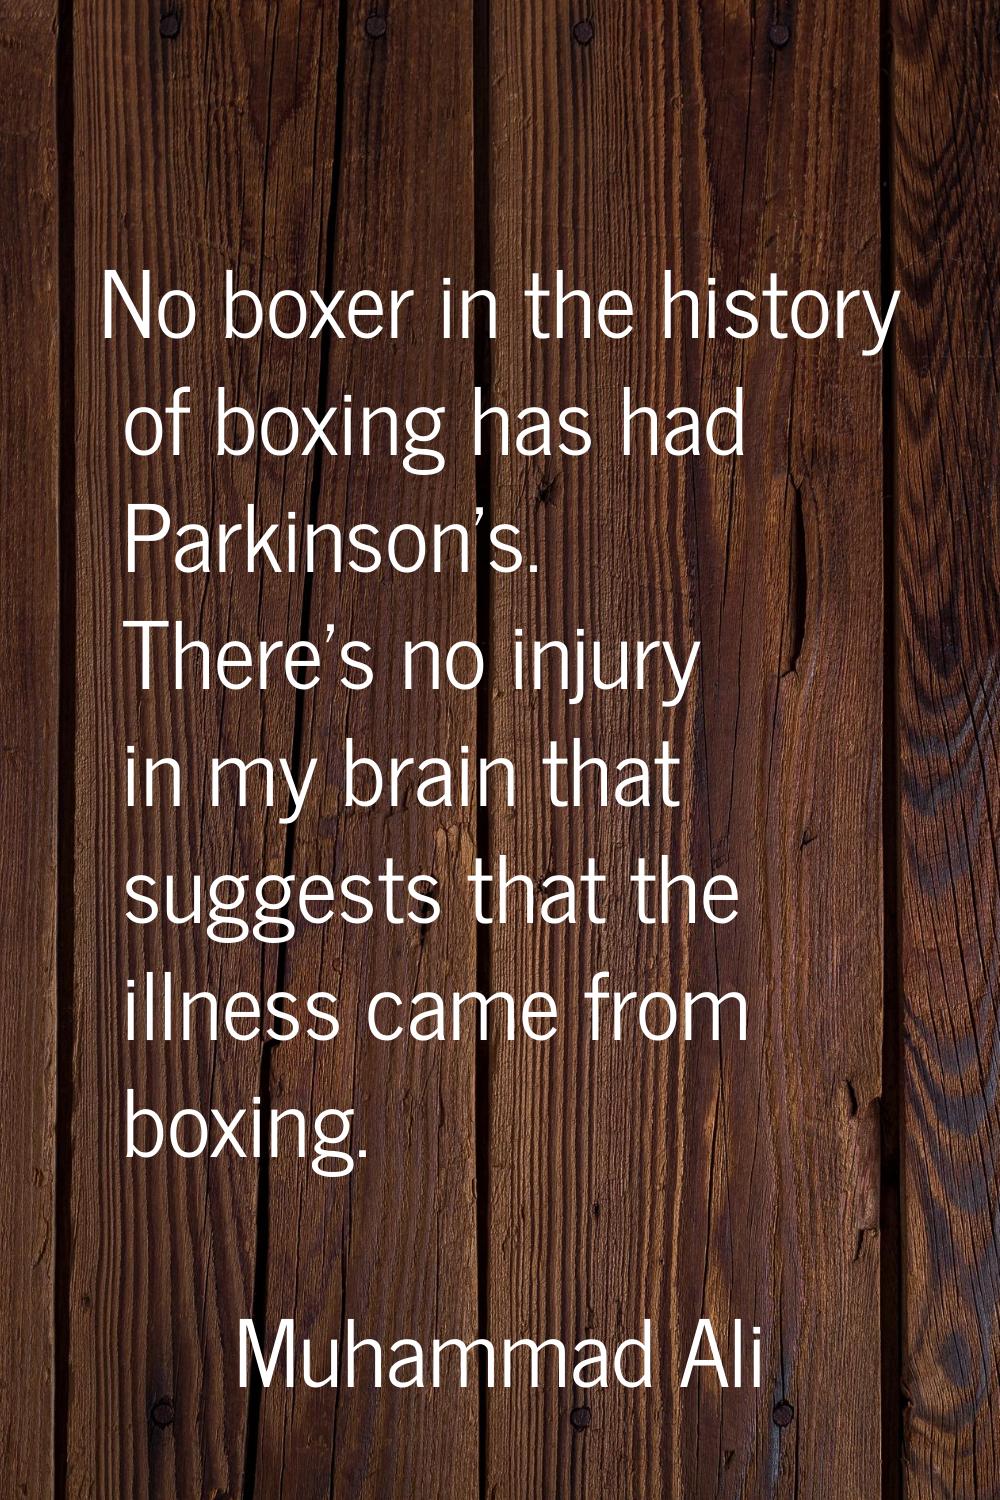 No boxer in the history of boxing has had Parkinson's. There's no injury in my brain that suggests 